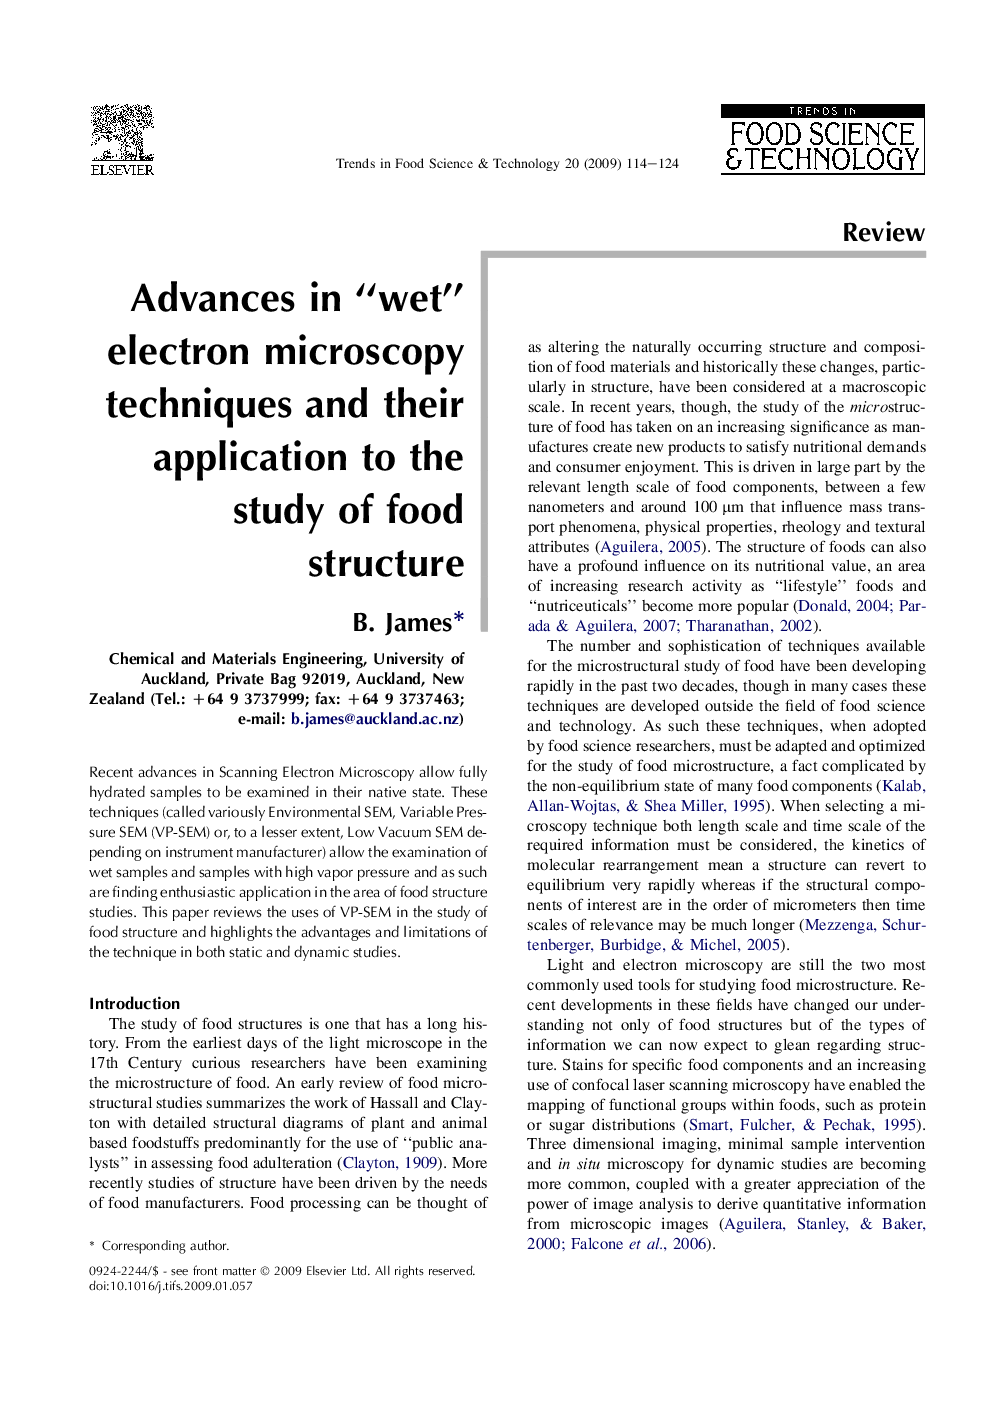 Advances in “wet” electron microscopy techniques and their application to the study of food structure